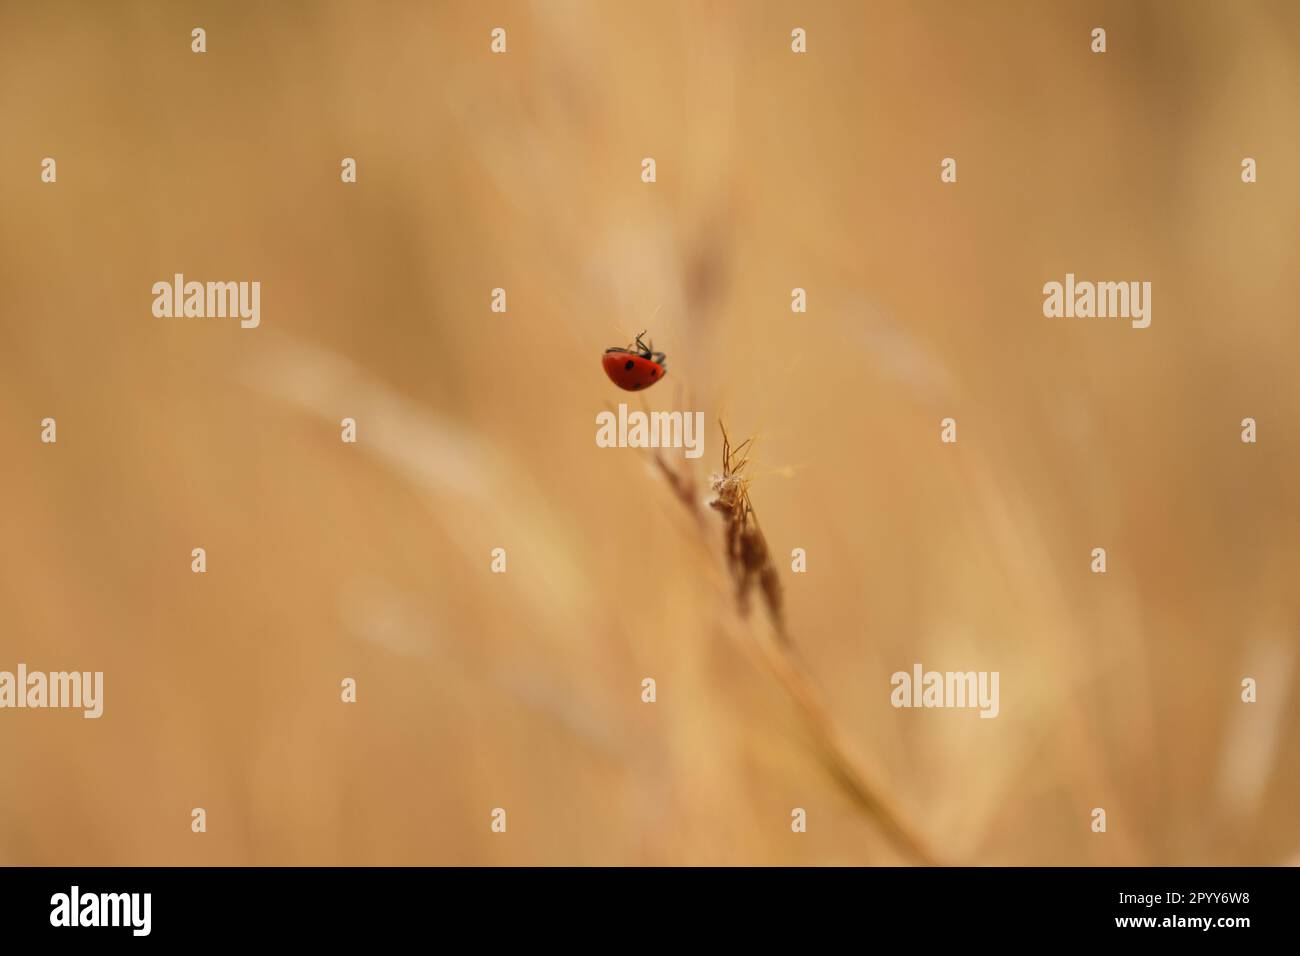 A red and black ladybird perched atop a patch of dried grass in a sunny outdoor setting Stock Photo